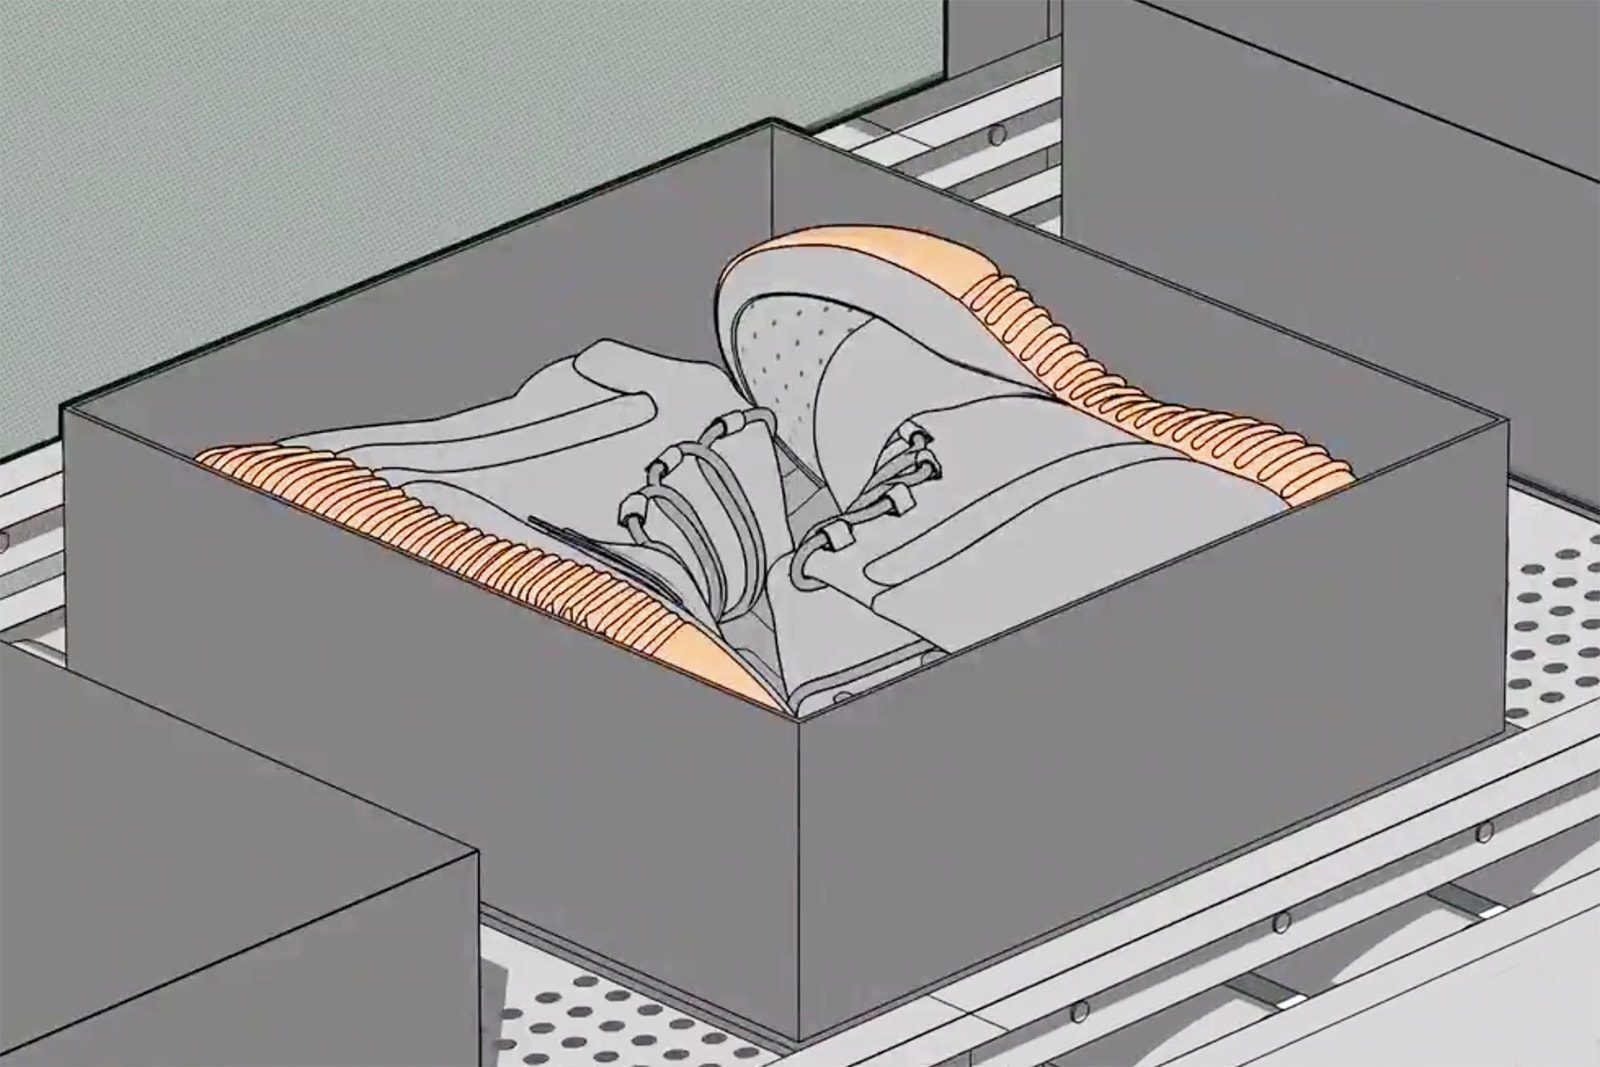 adidas-yeezy-750-how-its-made-00